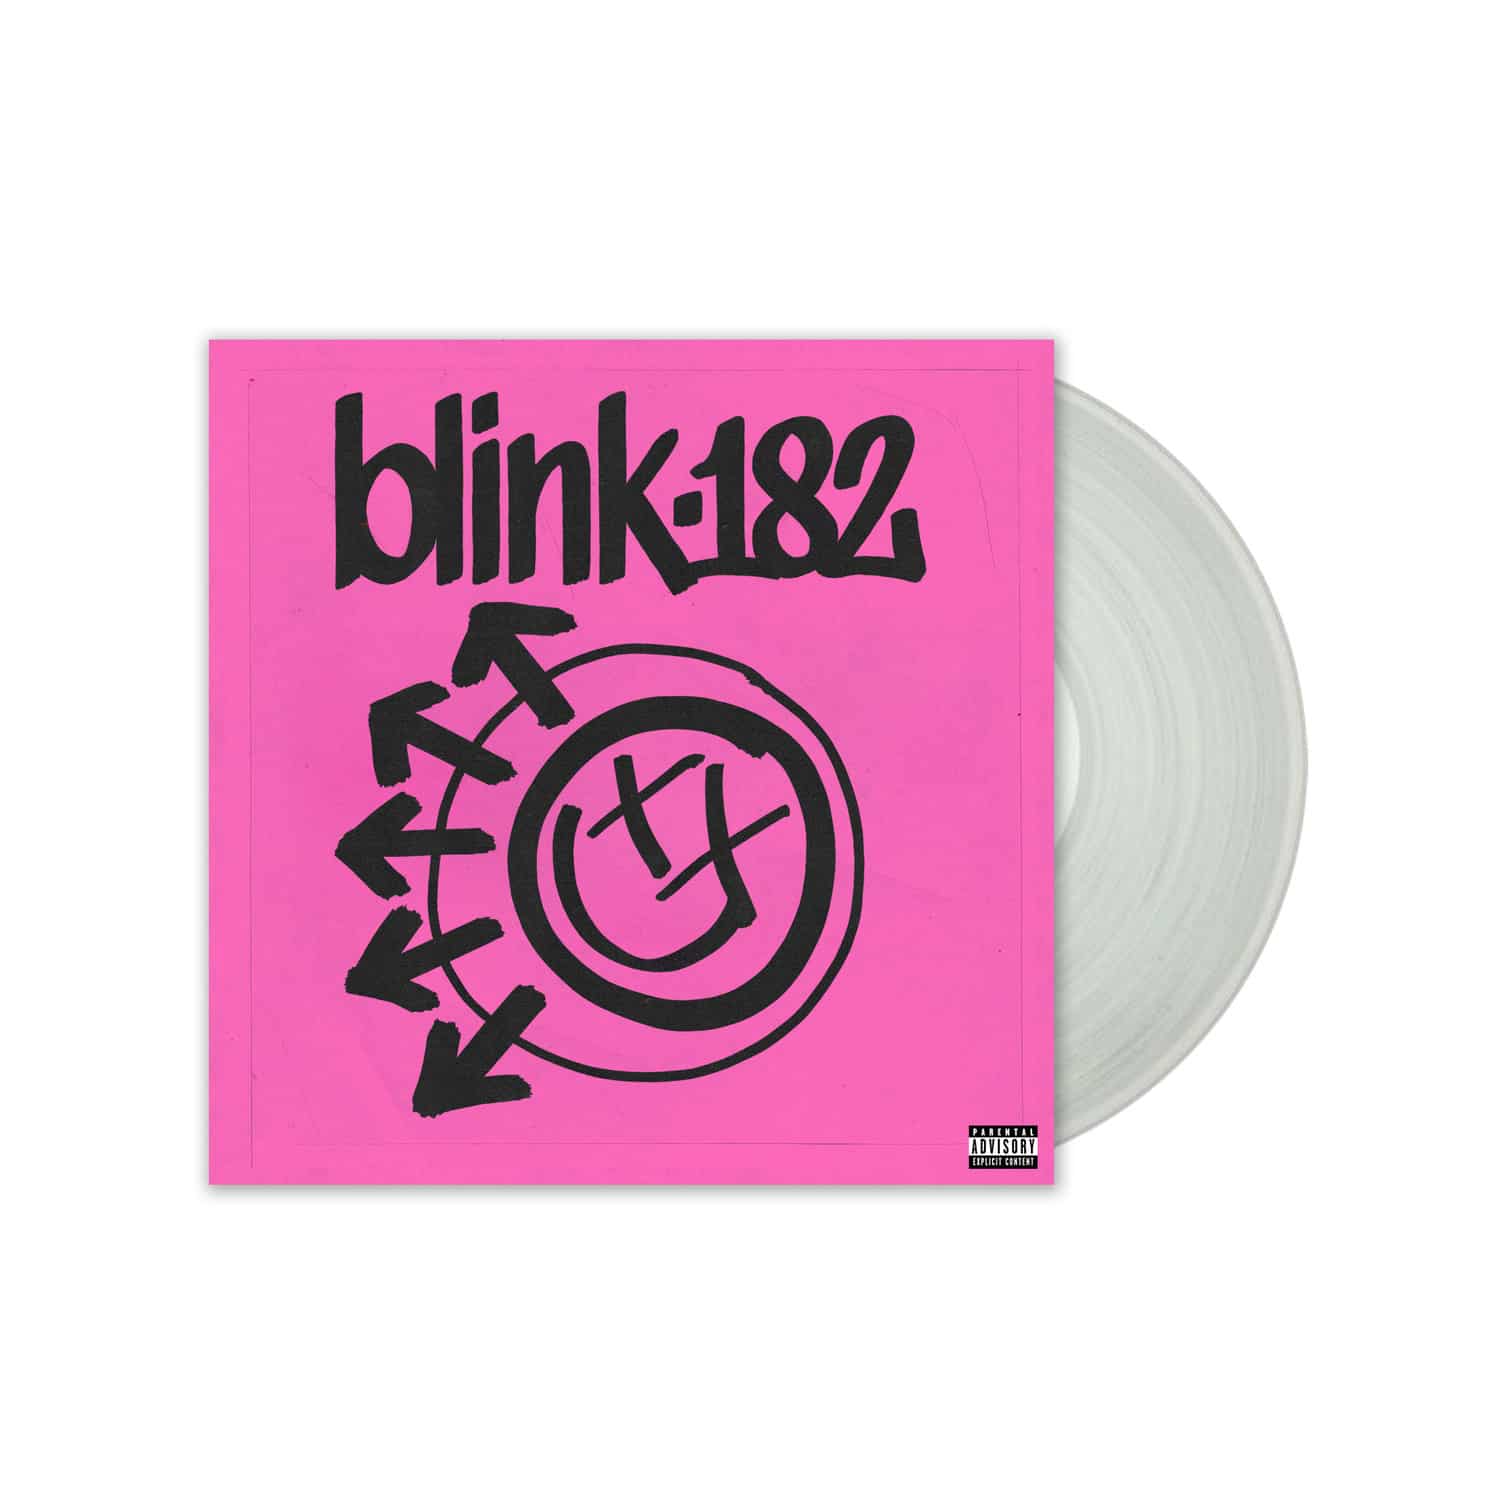 blink-182 - ONE MORE TIME... 